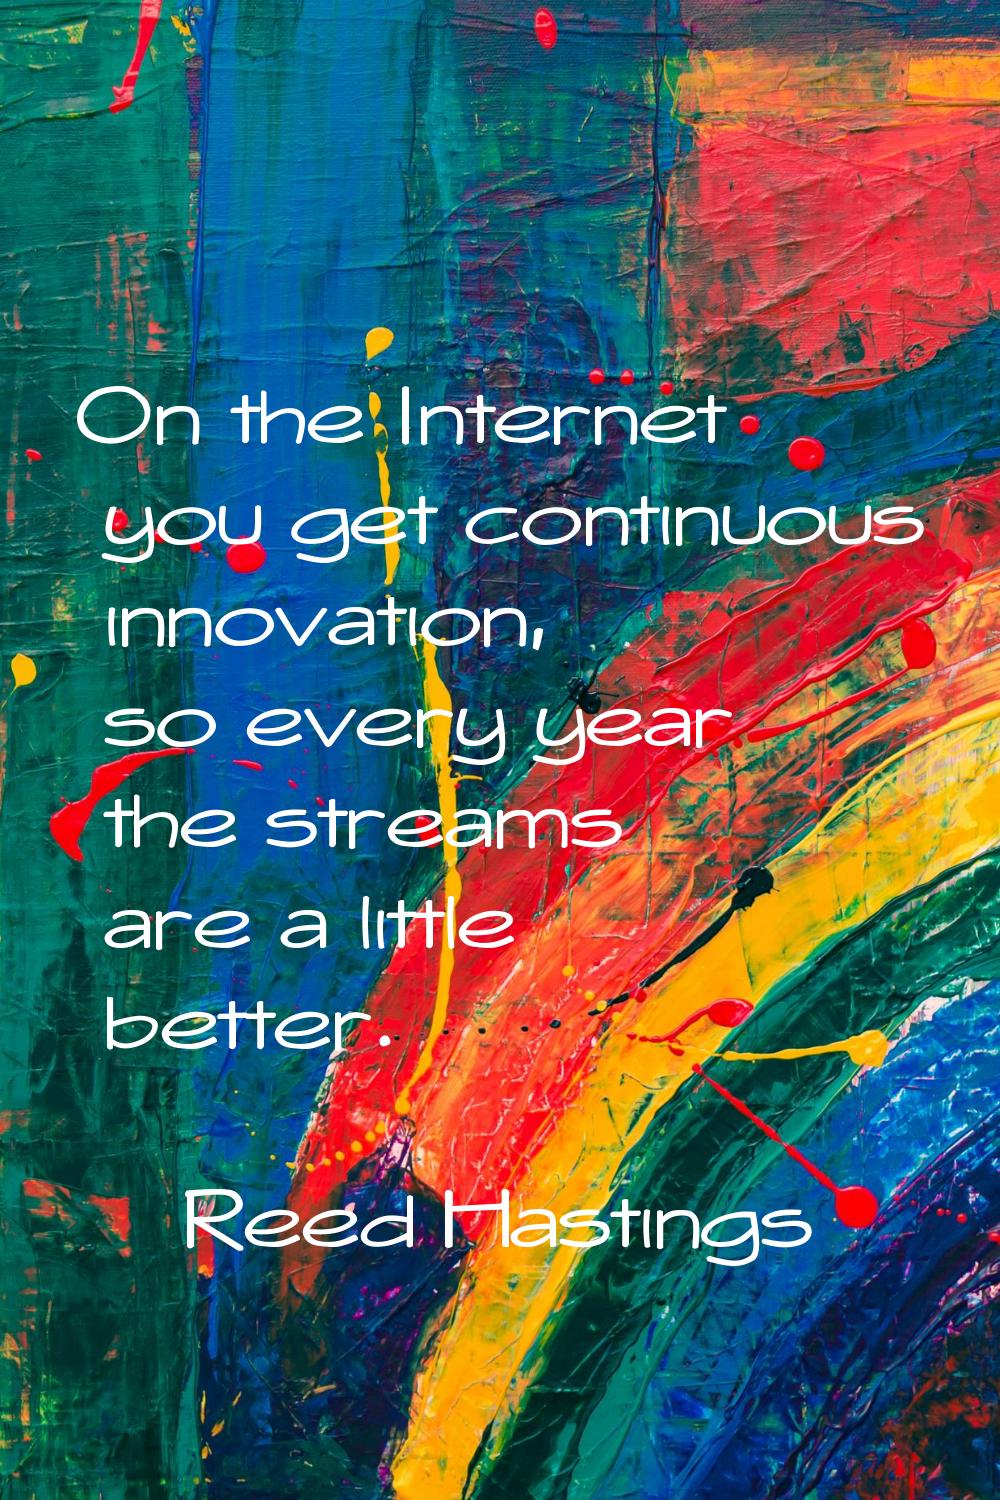 On the Internet you get continuous innovation, so every year the streams are a little better.